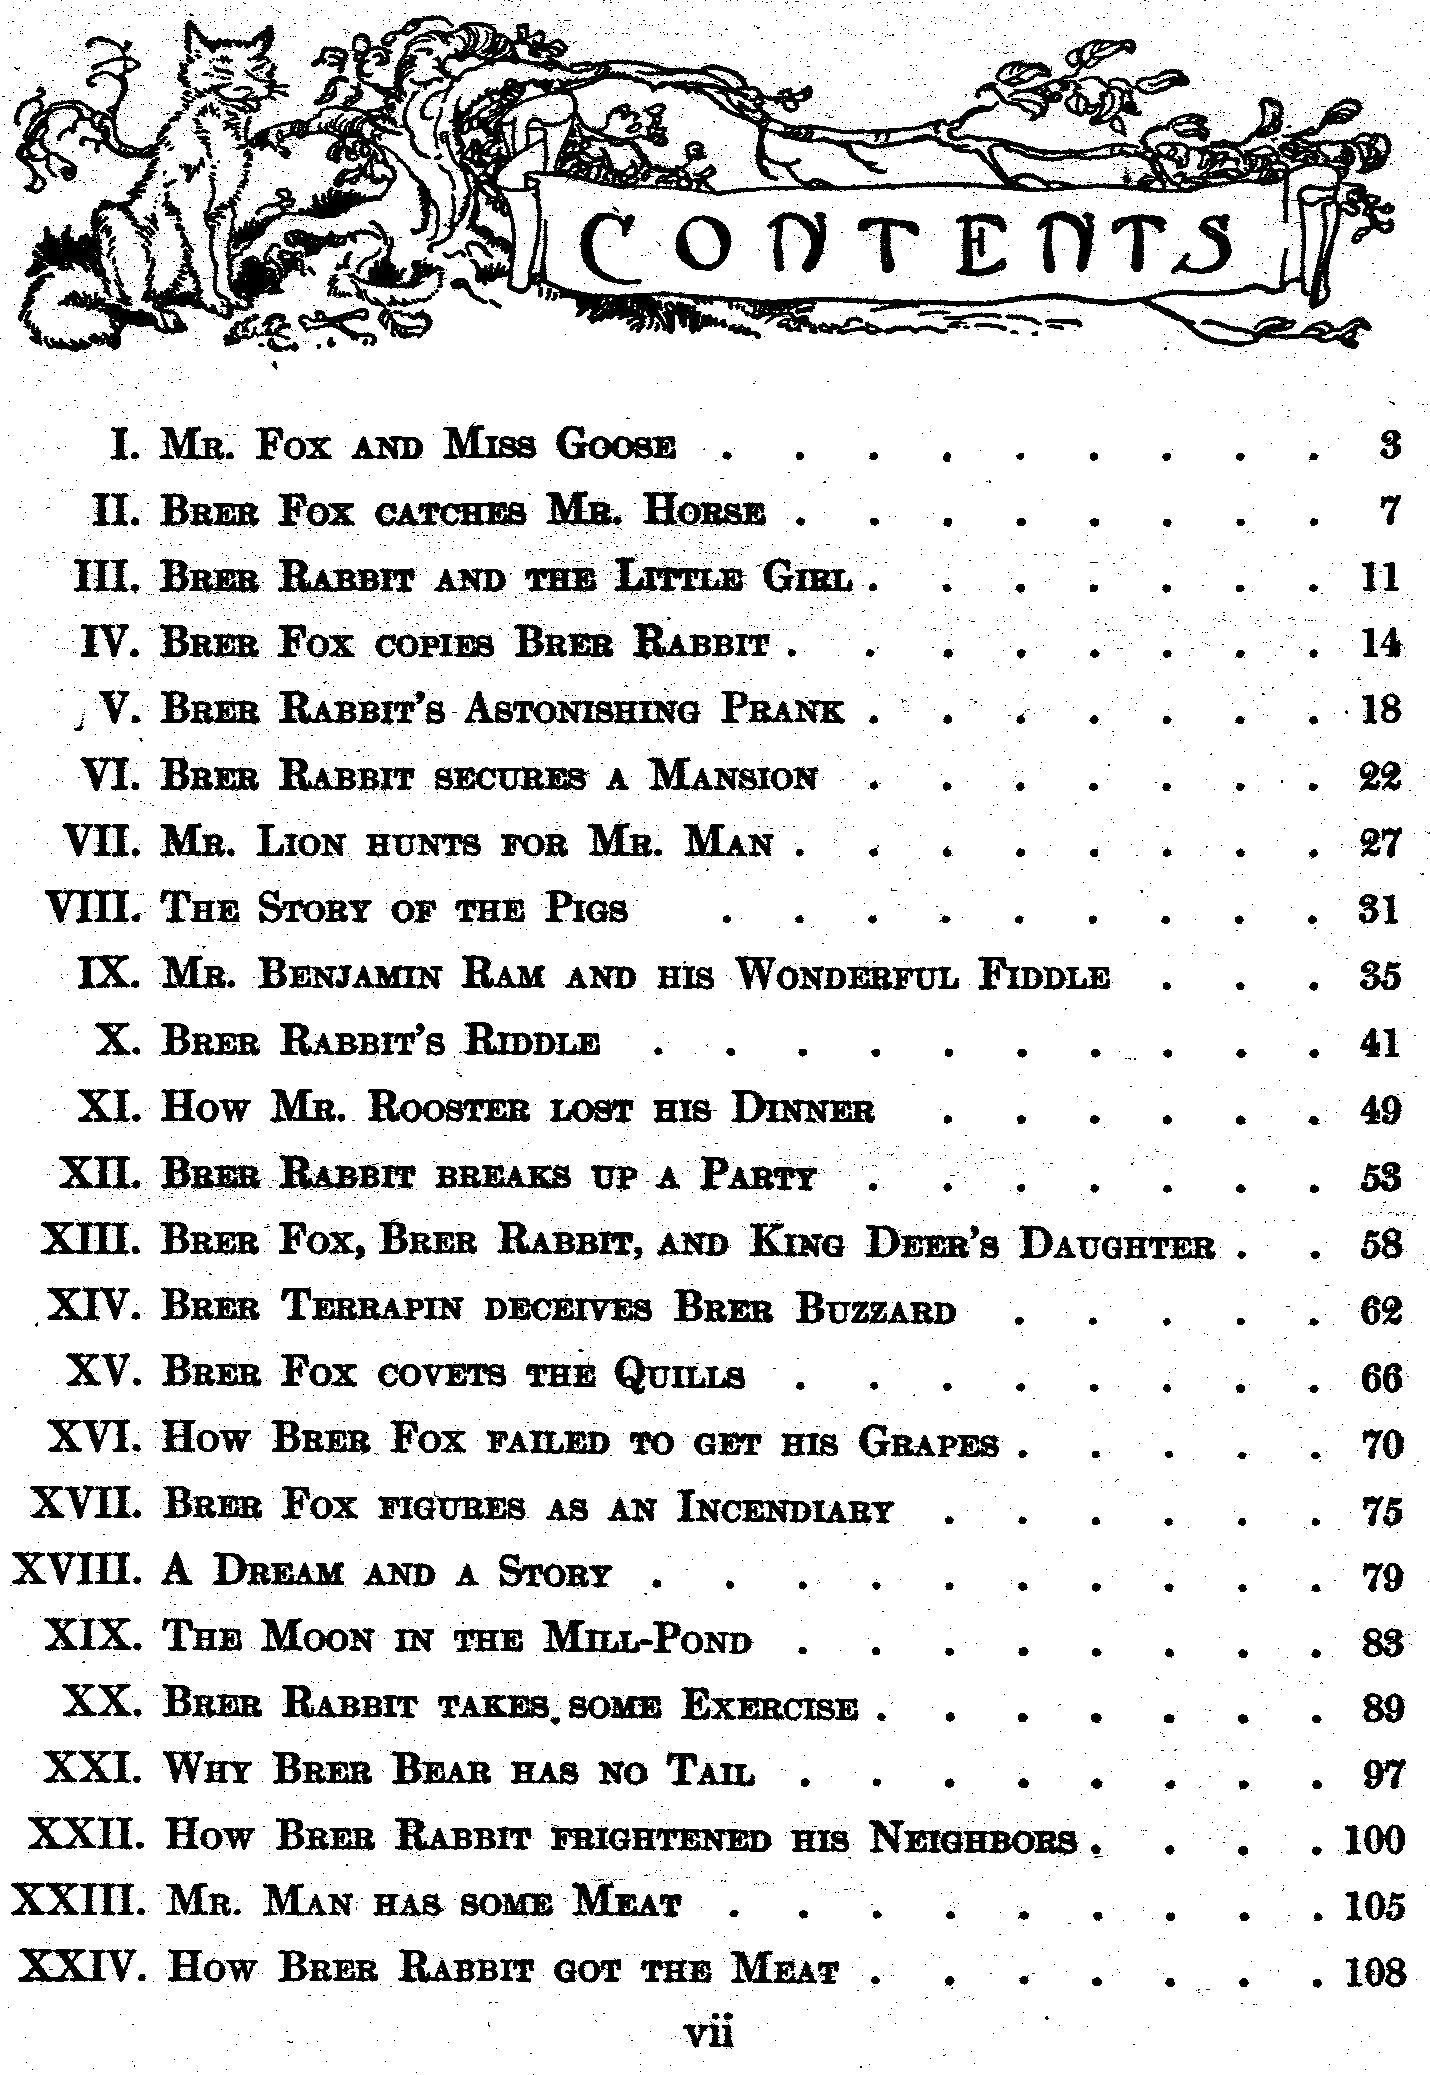 [Contents Page 1 of 4]